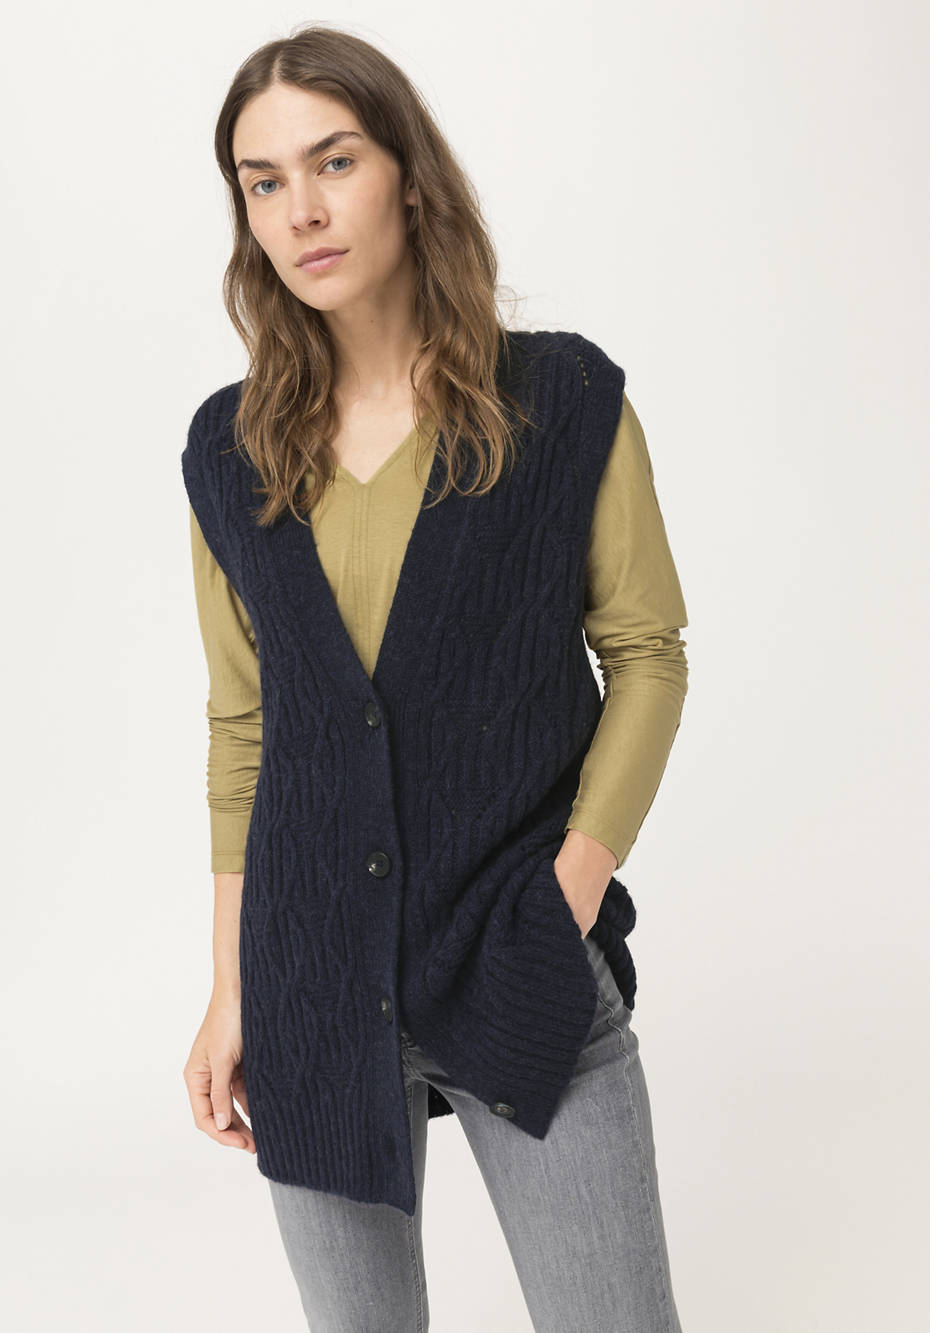 Cardigan made from pure baby alpaca